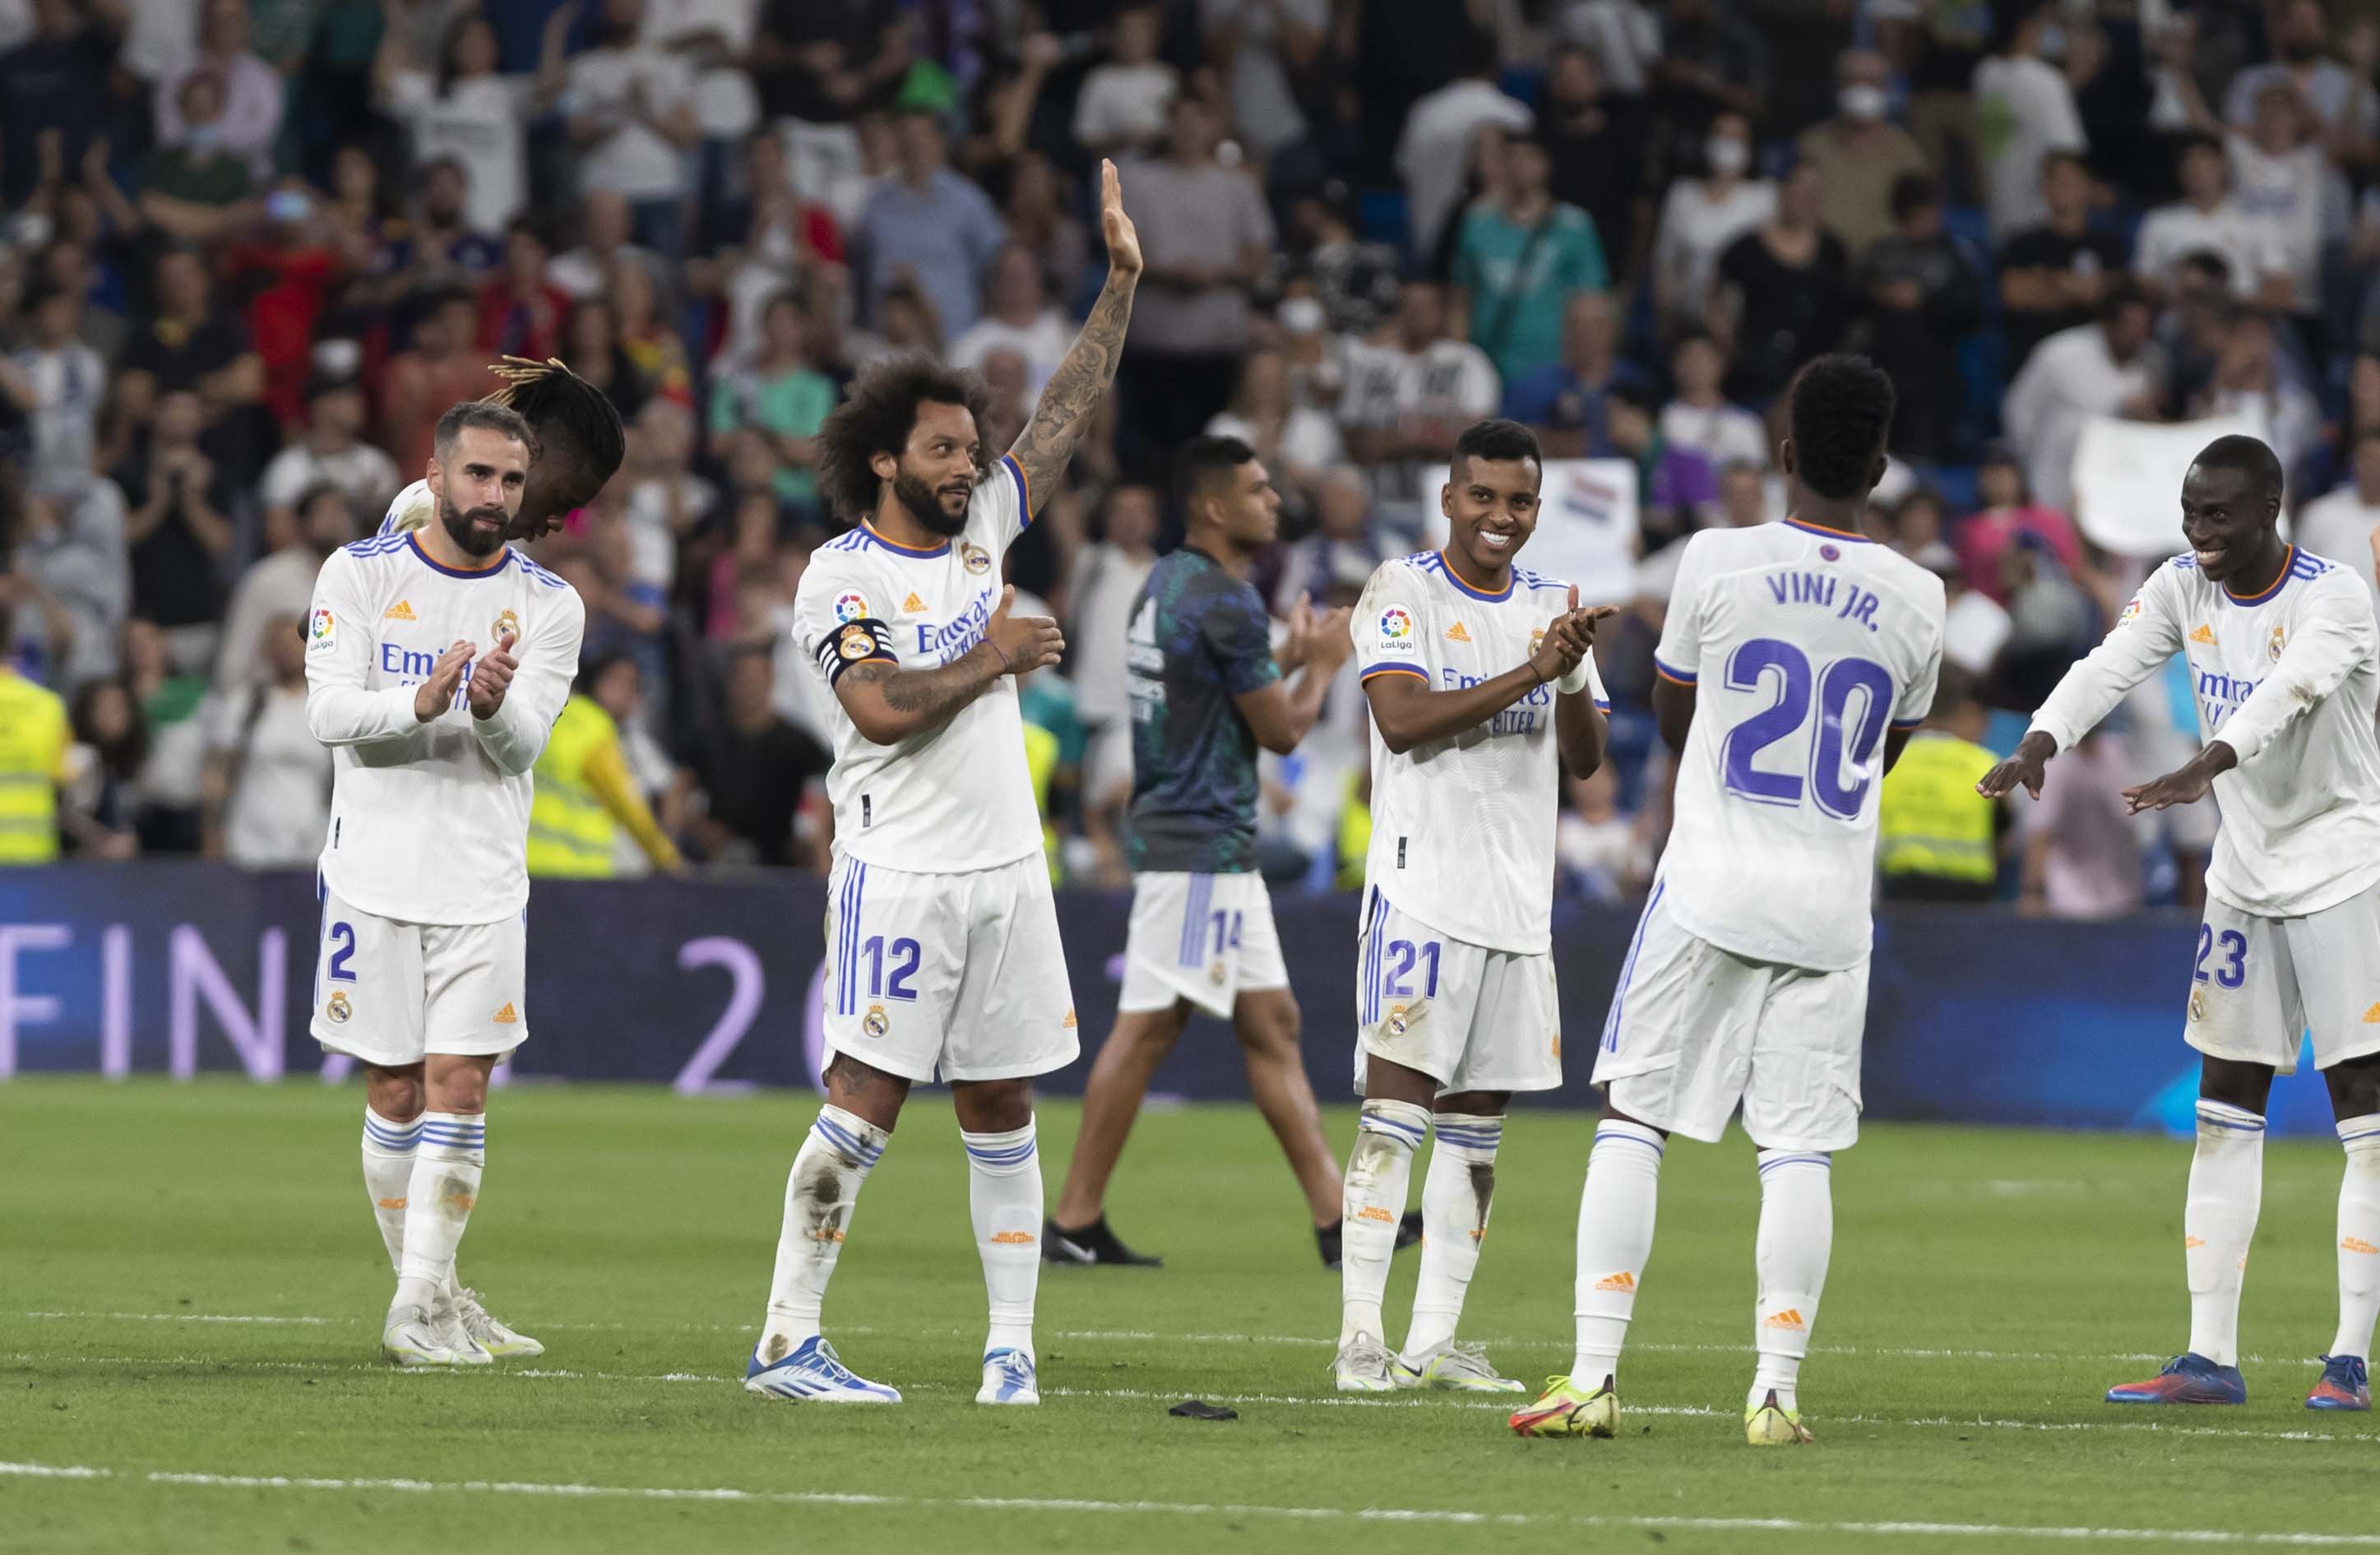 La Liga: Champions Real Madrid end triumphant La Liga season with a GOALLESS draw against Real Betis, Points shared at the Santiago Bernabeu, Watch HIGHLIGHTS